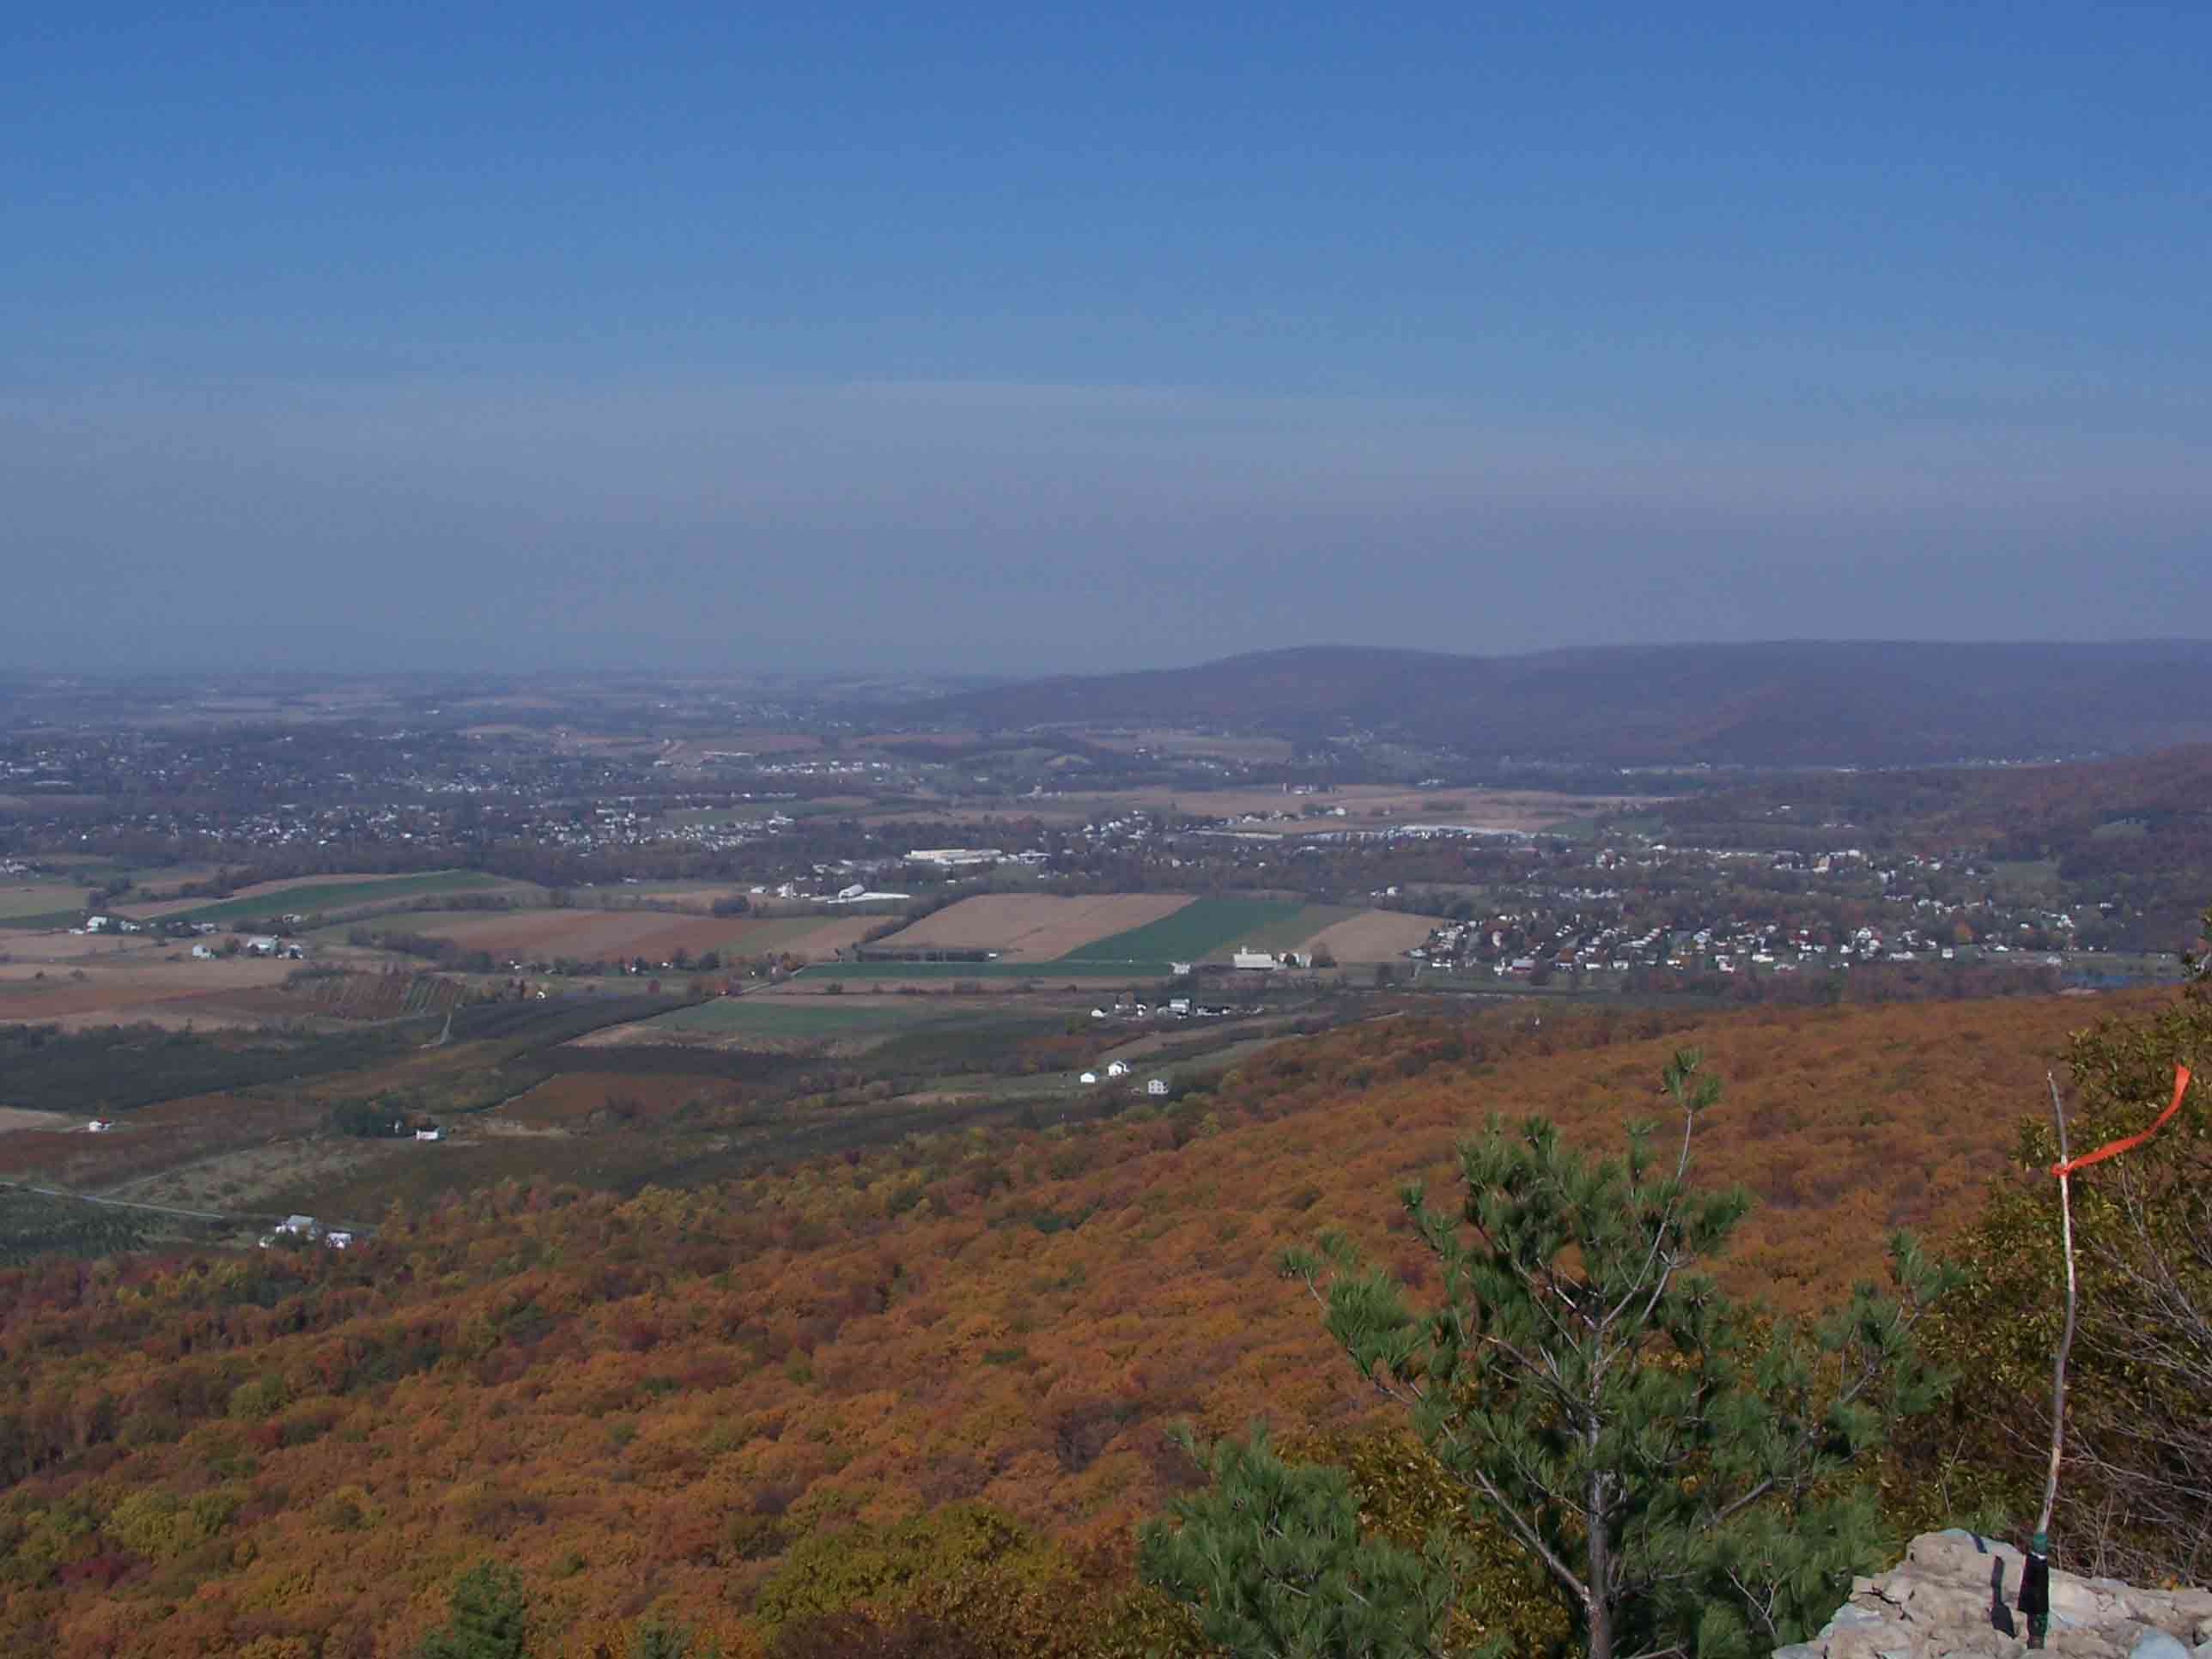 View from High Rock - blue-blazed loop trail. Courtesy at@rohland.org